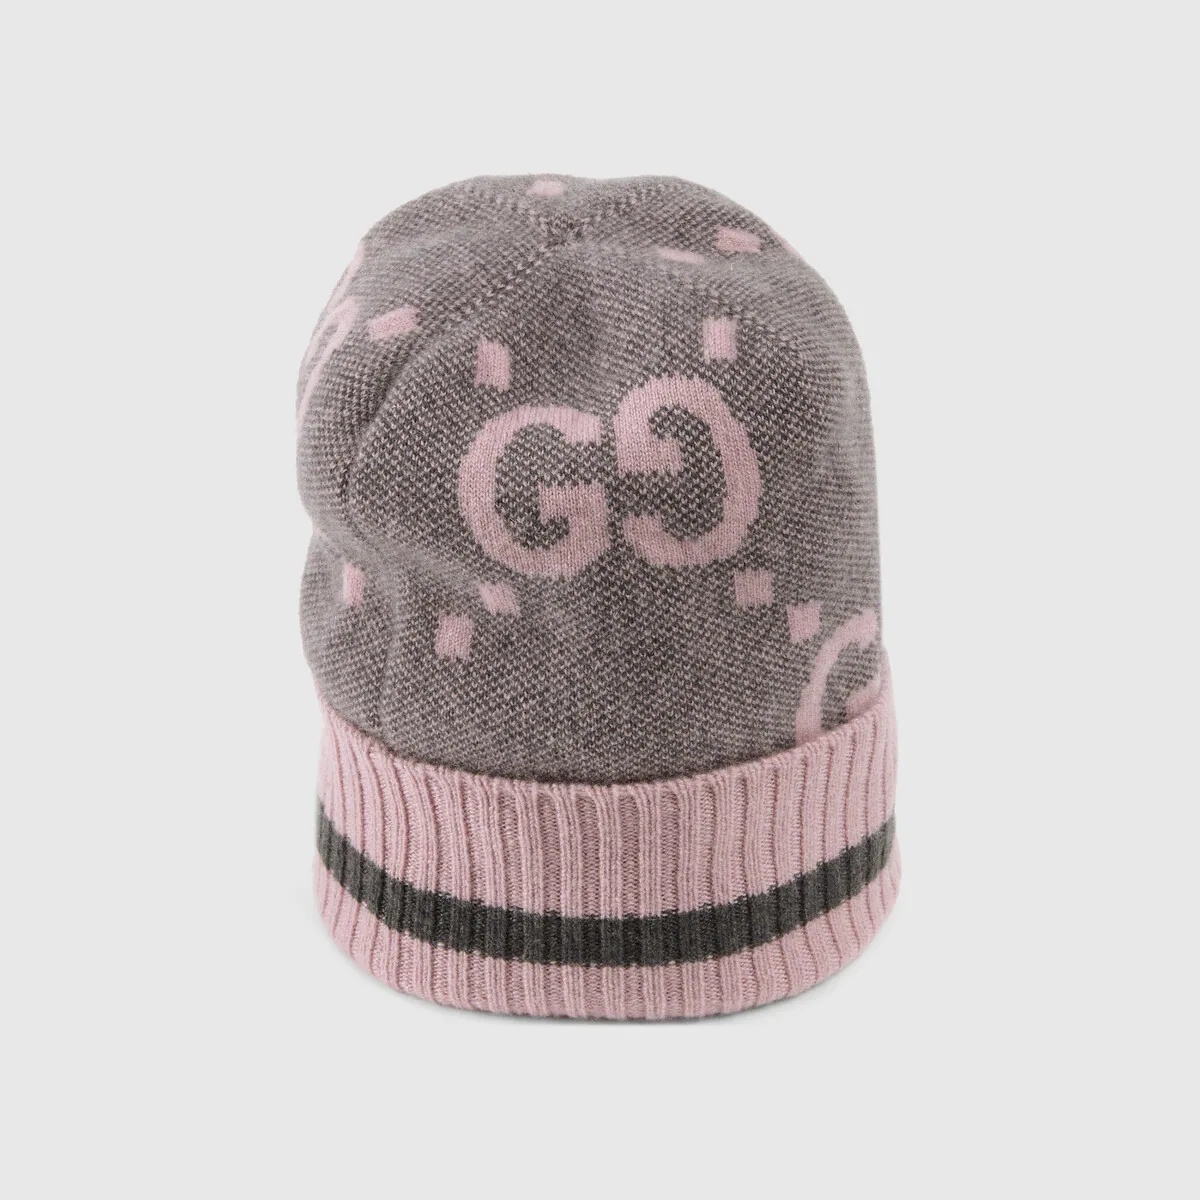 GG knit cashmere hat - 3